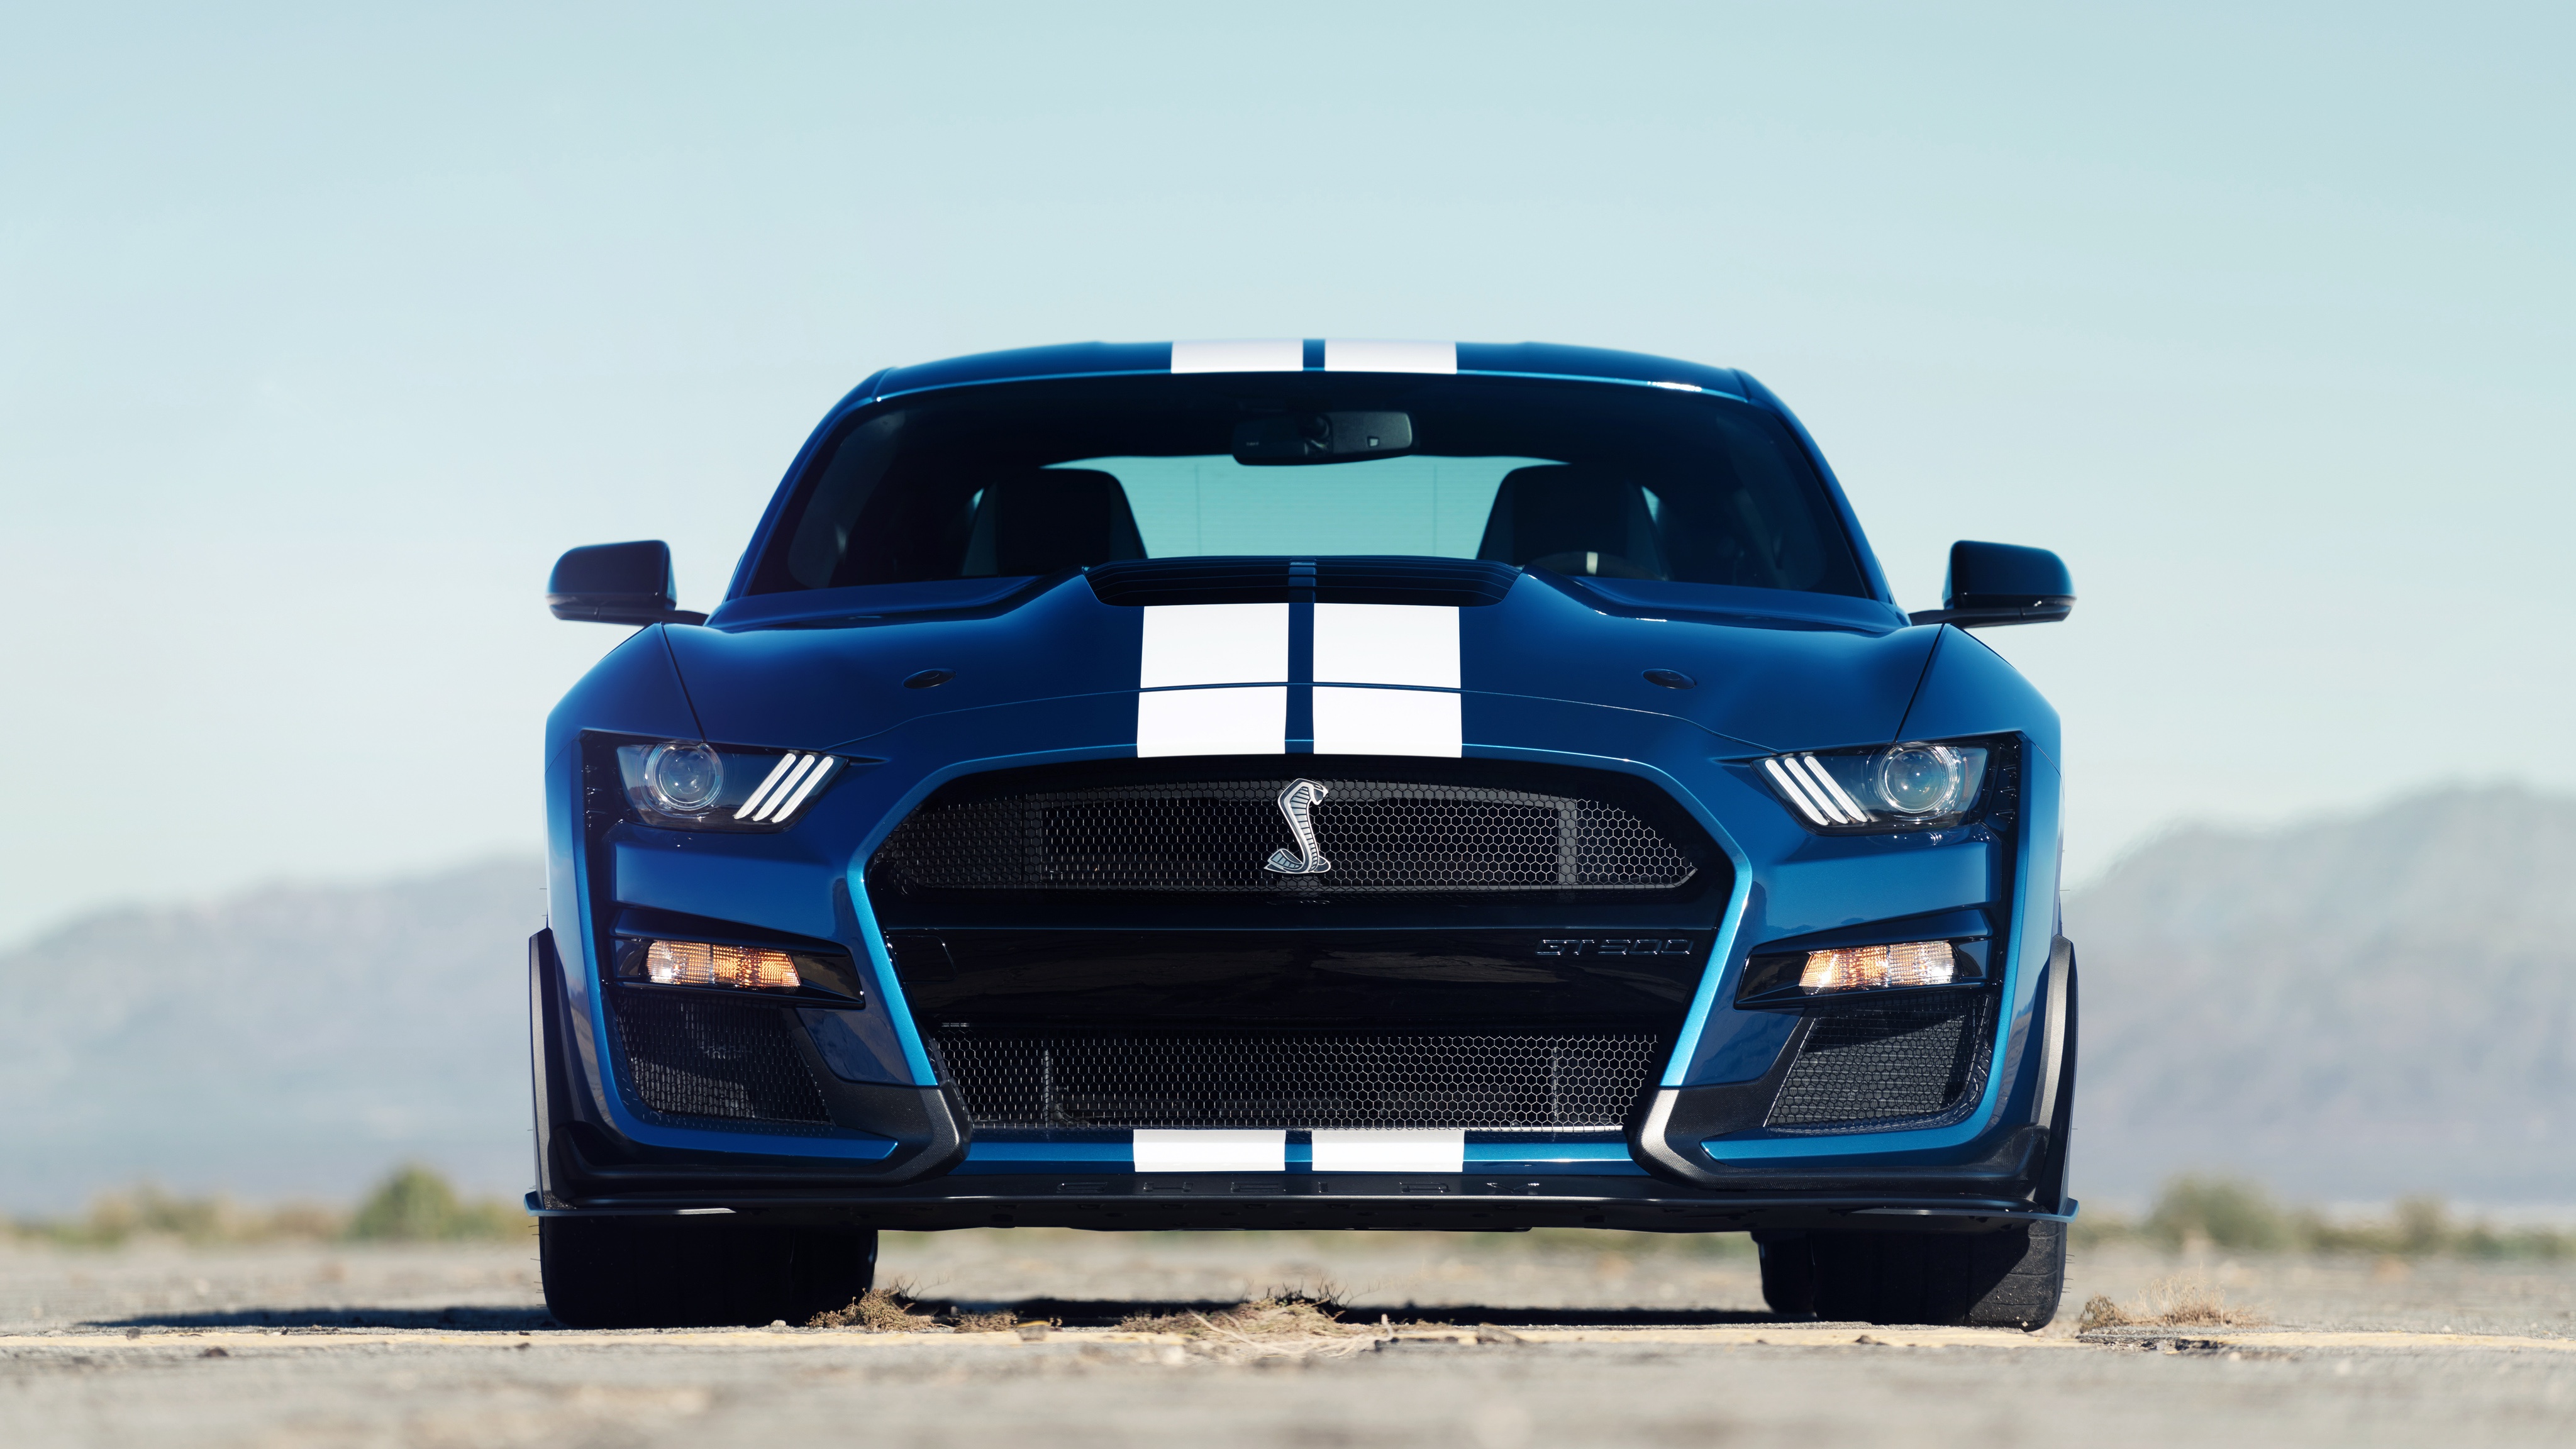 Blue Car Car Ford Ford Mustang Ford Mustang Shelby Ford Mustang Shelby Gt500 Muscle Car Vehicle 4096x2304